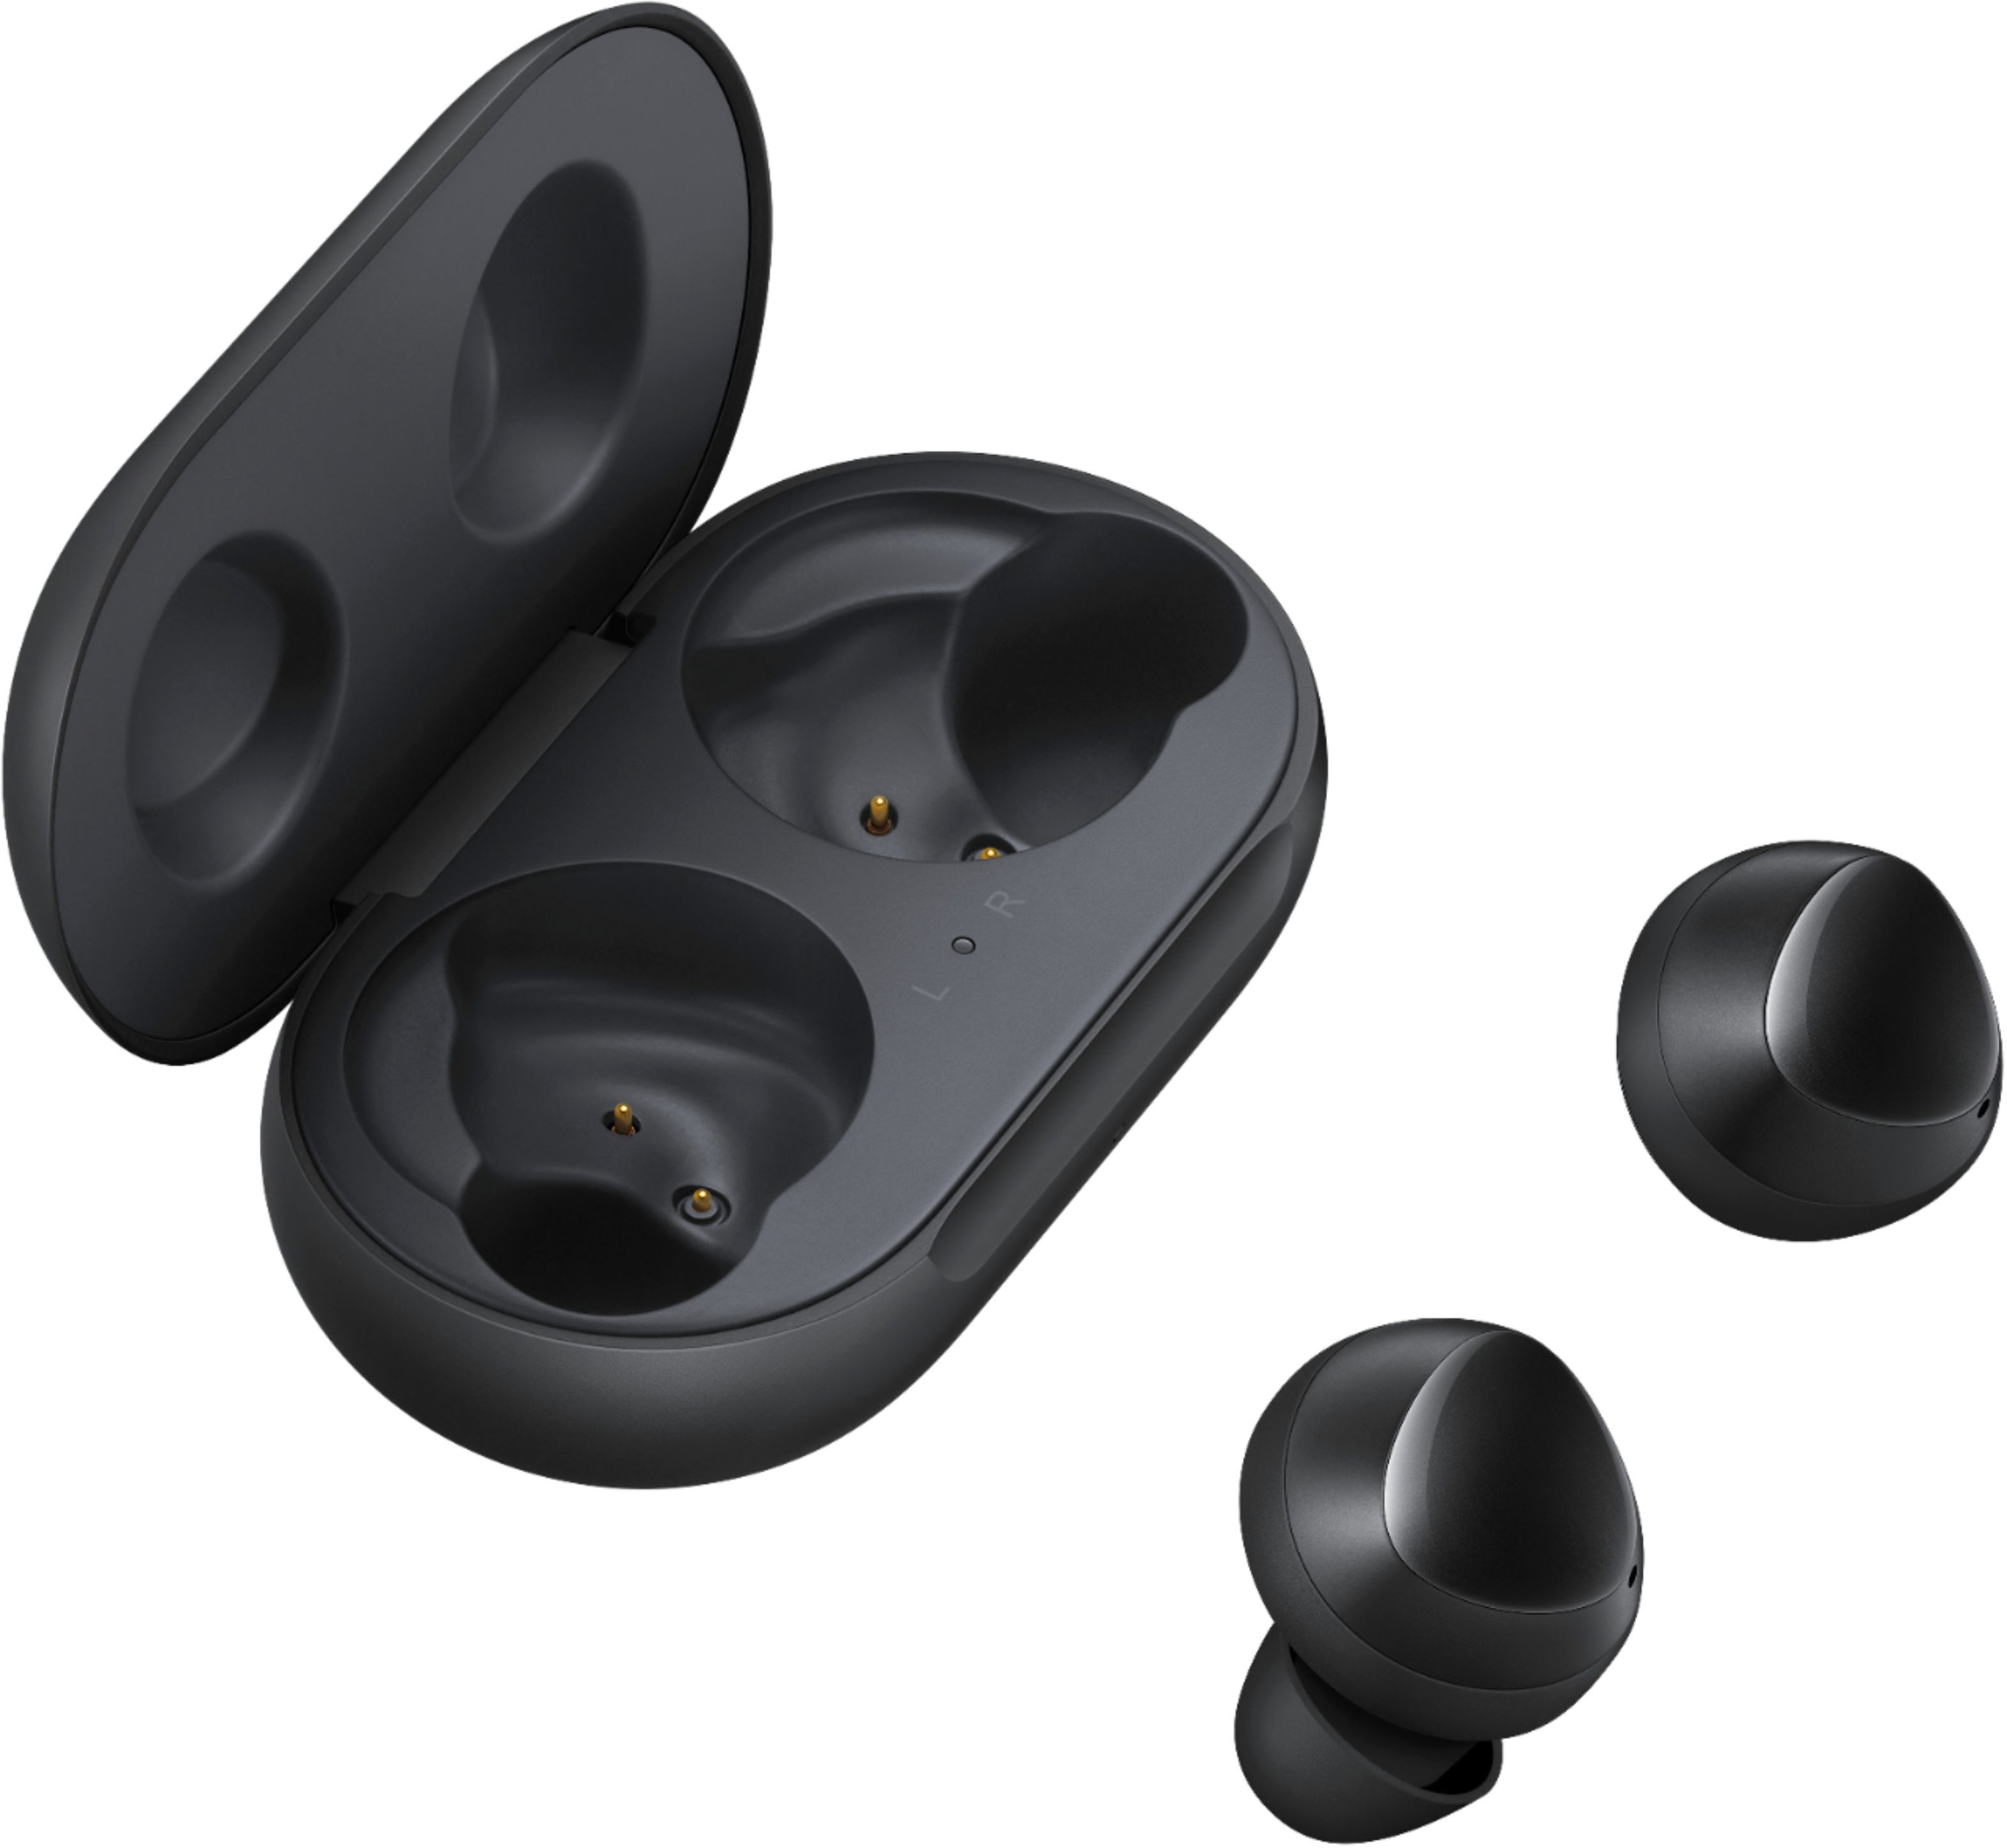 Samsung Galaxy Buds Review: Surprisingly Excellent True Wireless